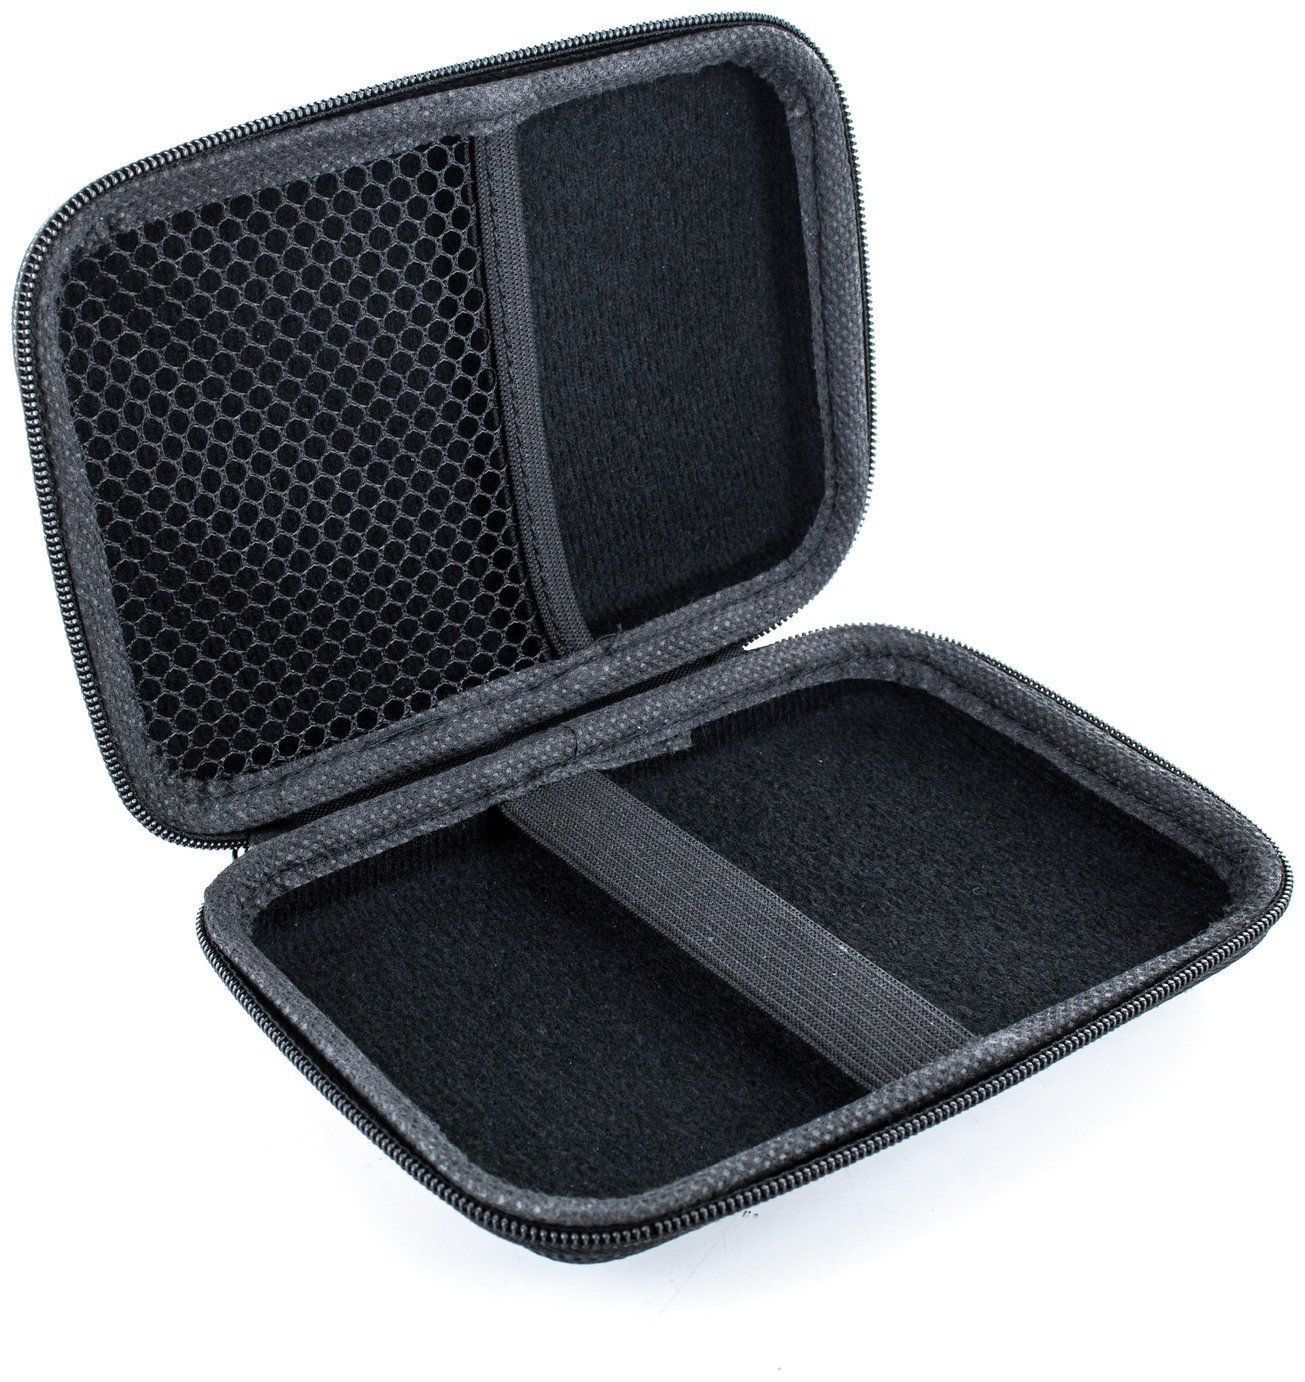 Compact Camera Case Review